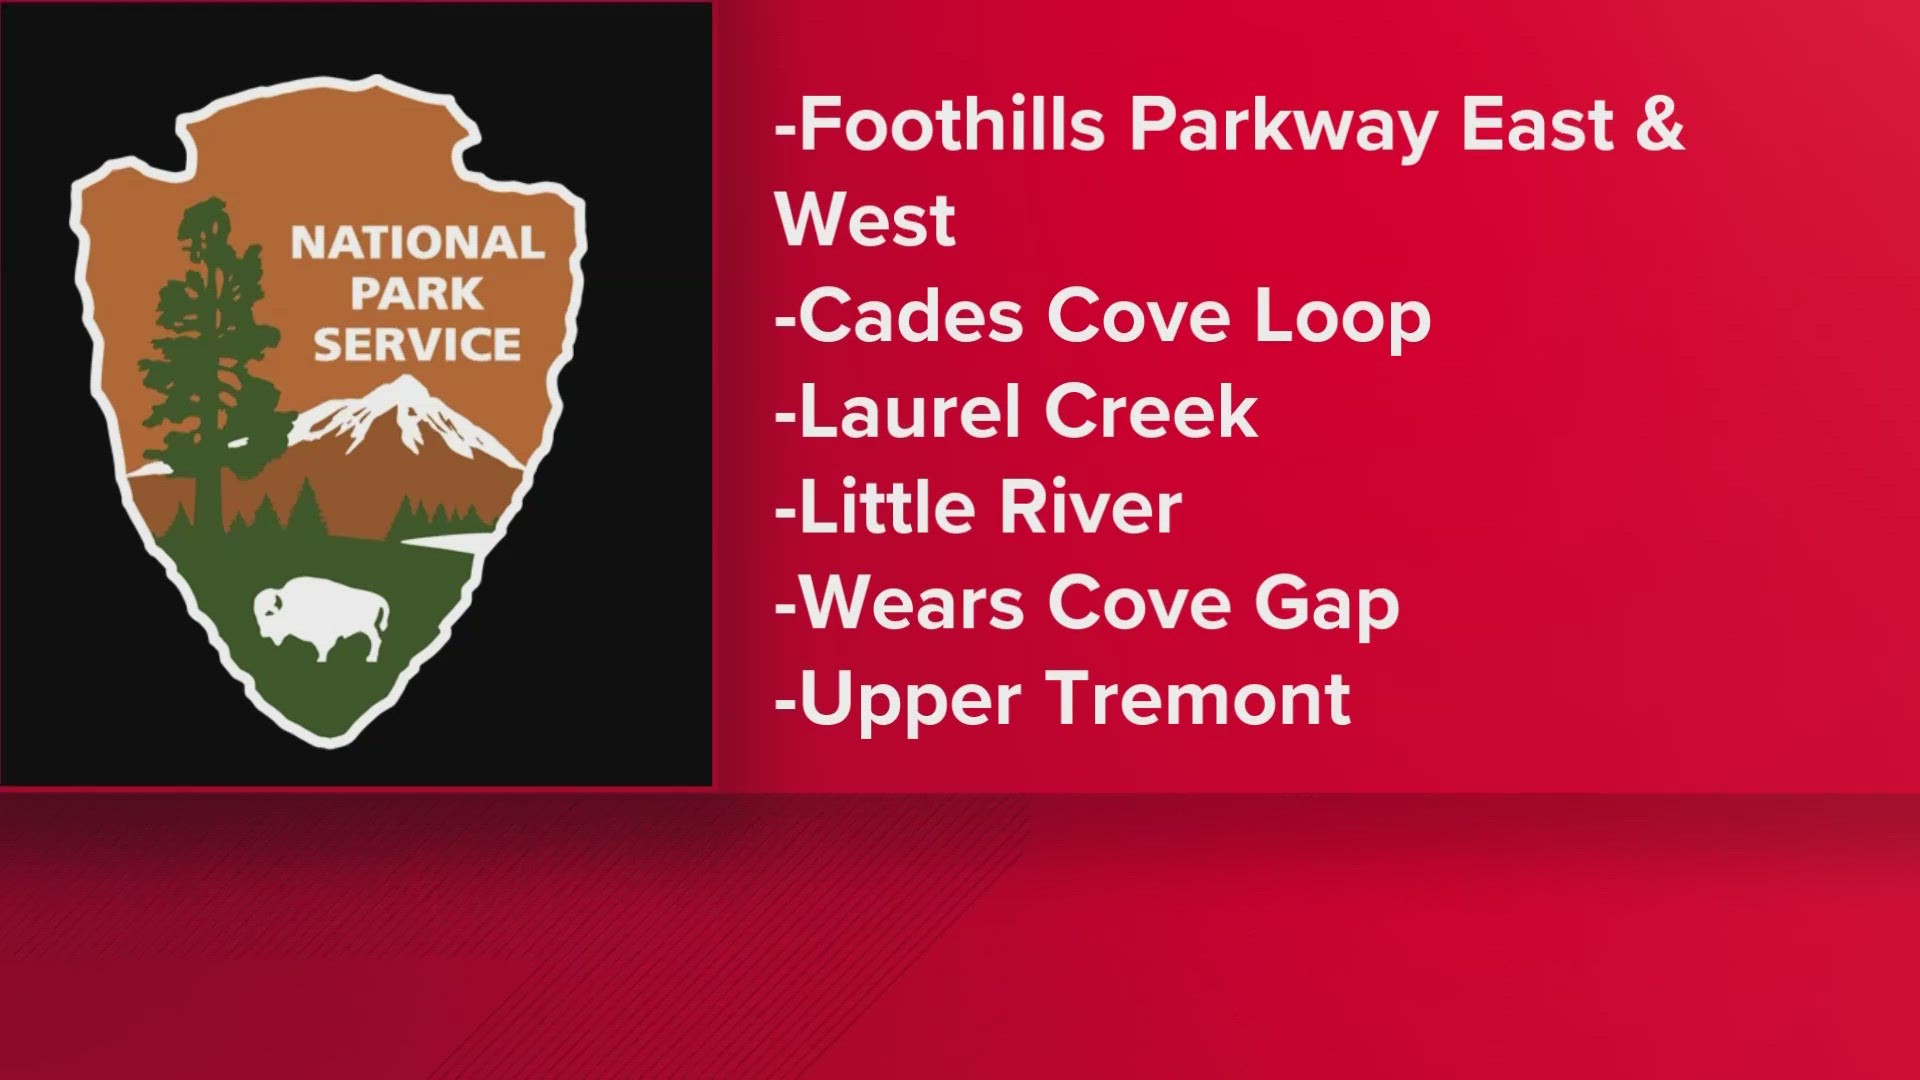 Roads include the Foothills Parkway, Cades Cove Loop Road and others.